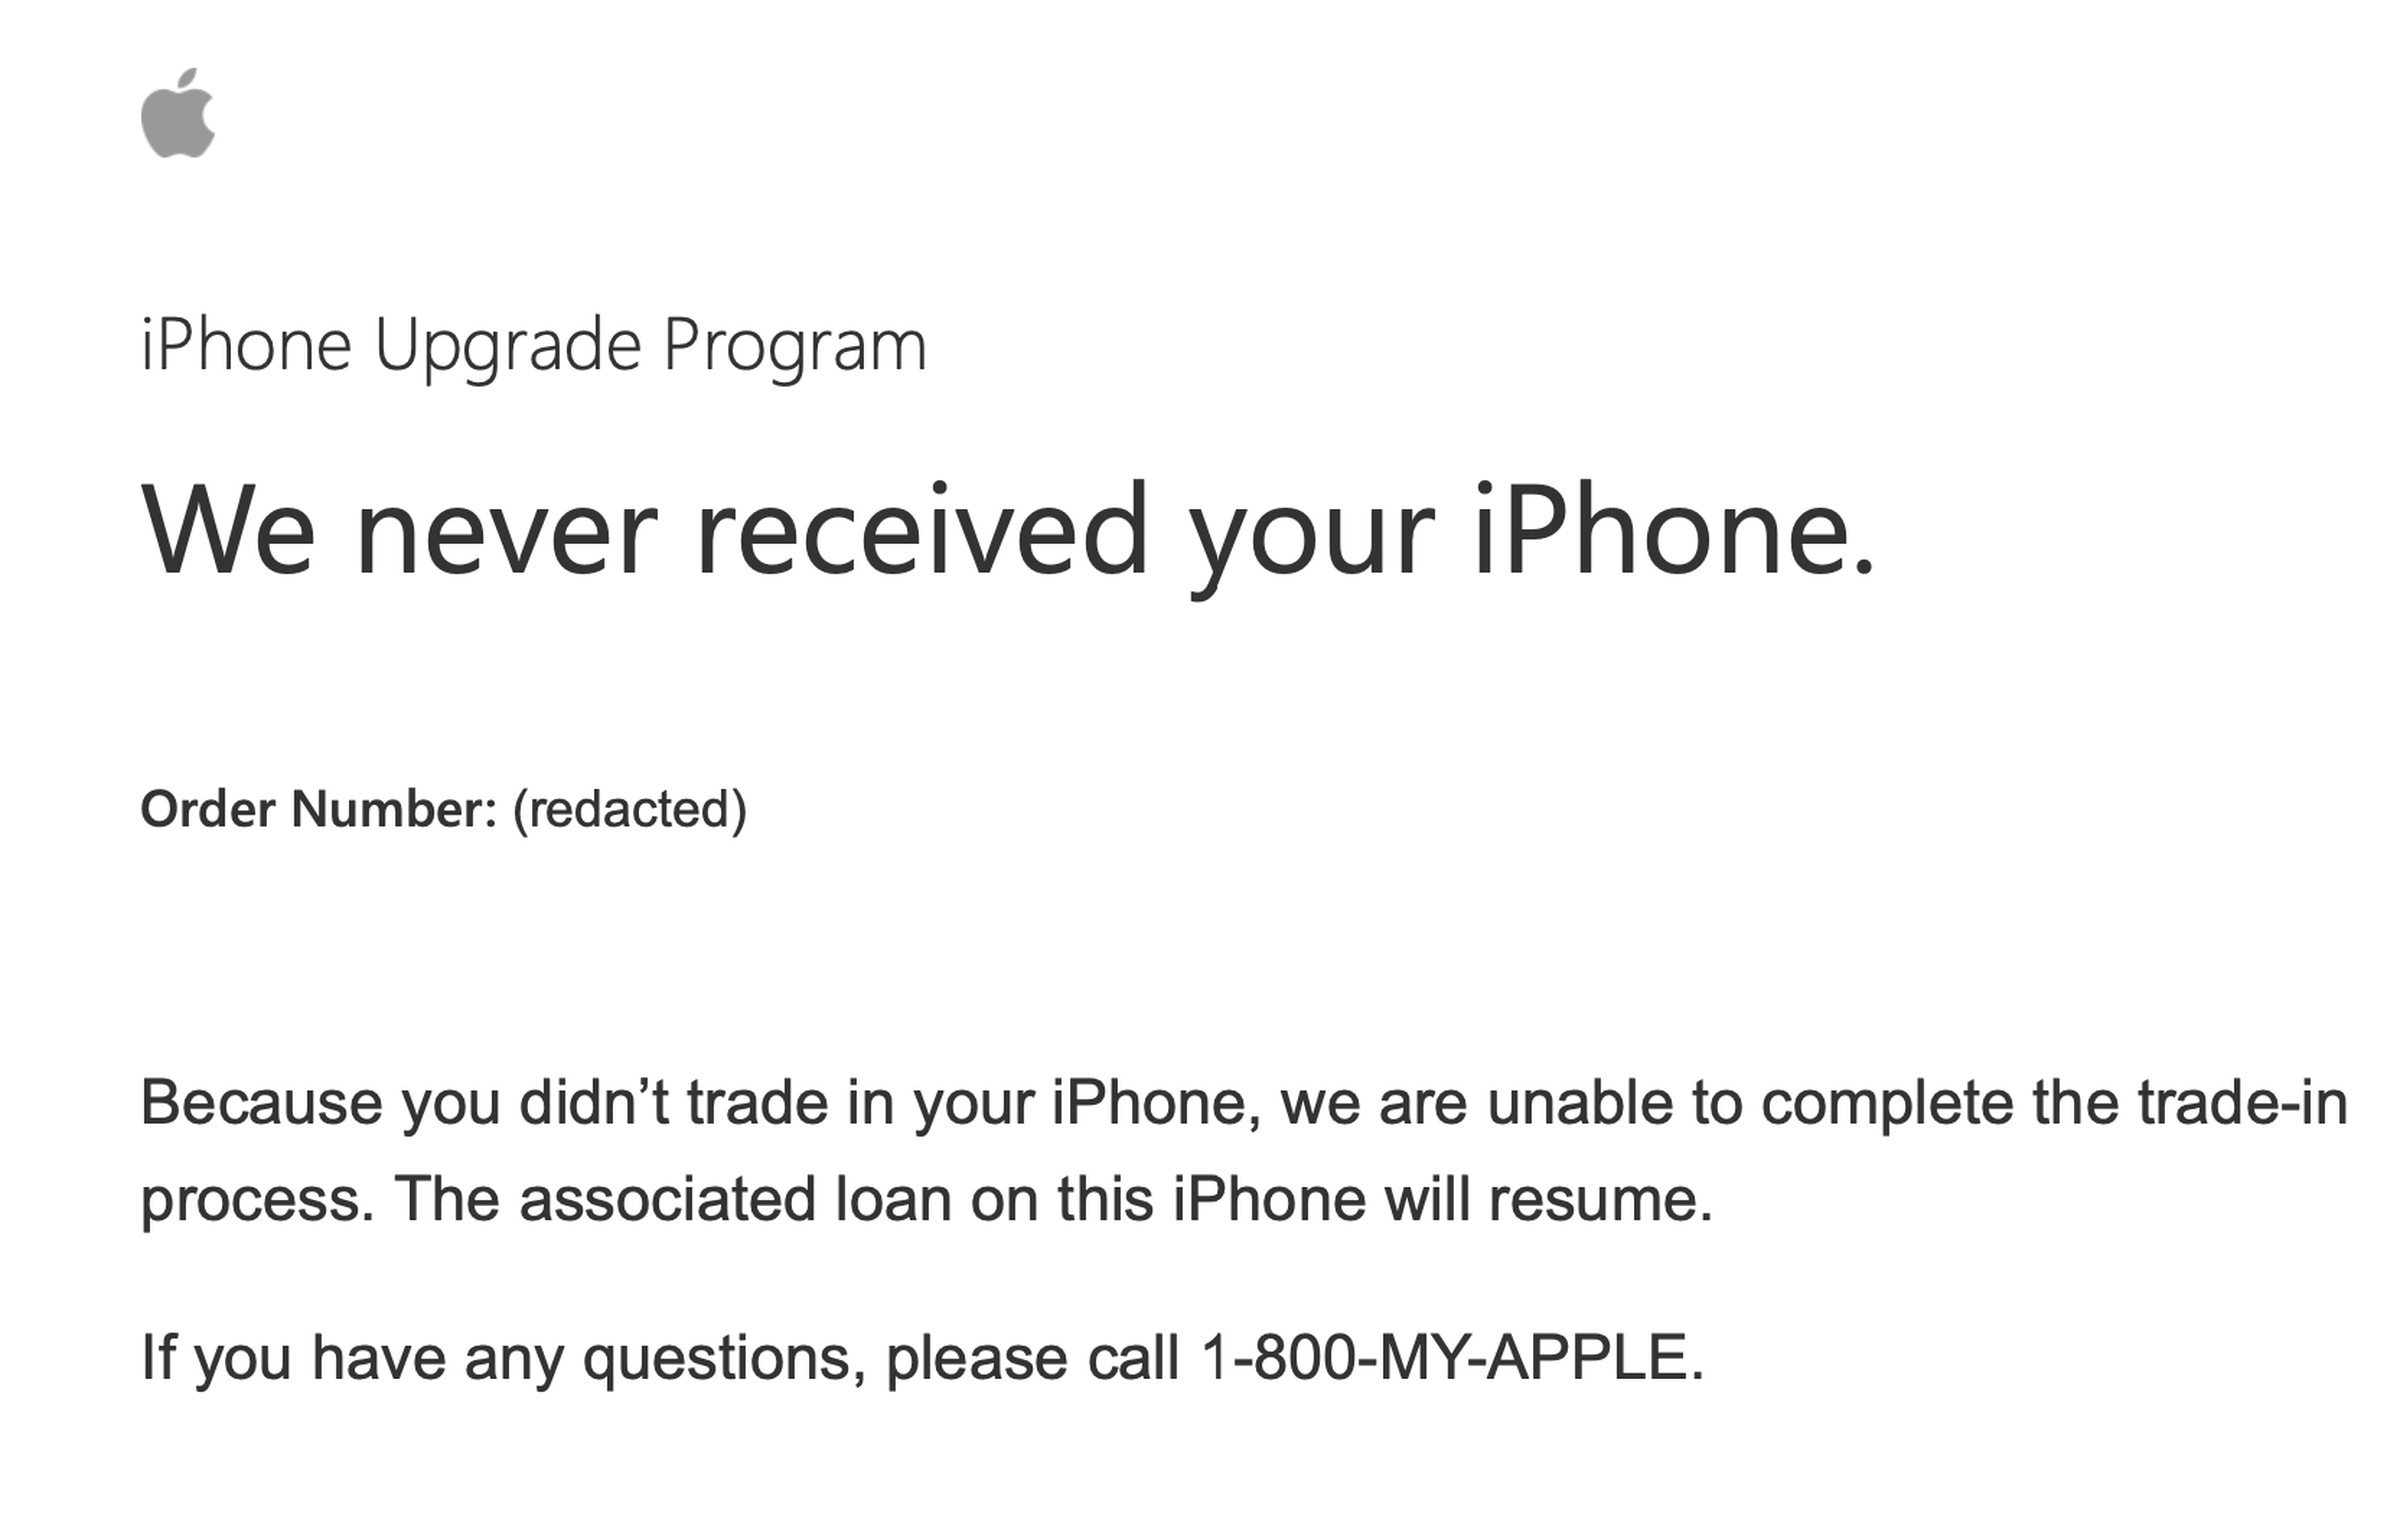 Because you didn’t trade in your phone, we are unable to complete the trade-in process. The associated loan on this iPhone will resume.